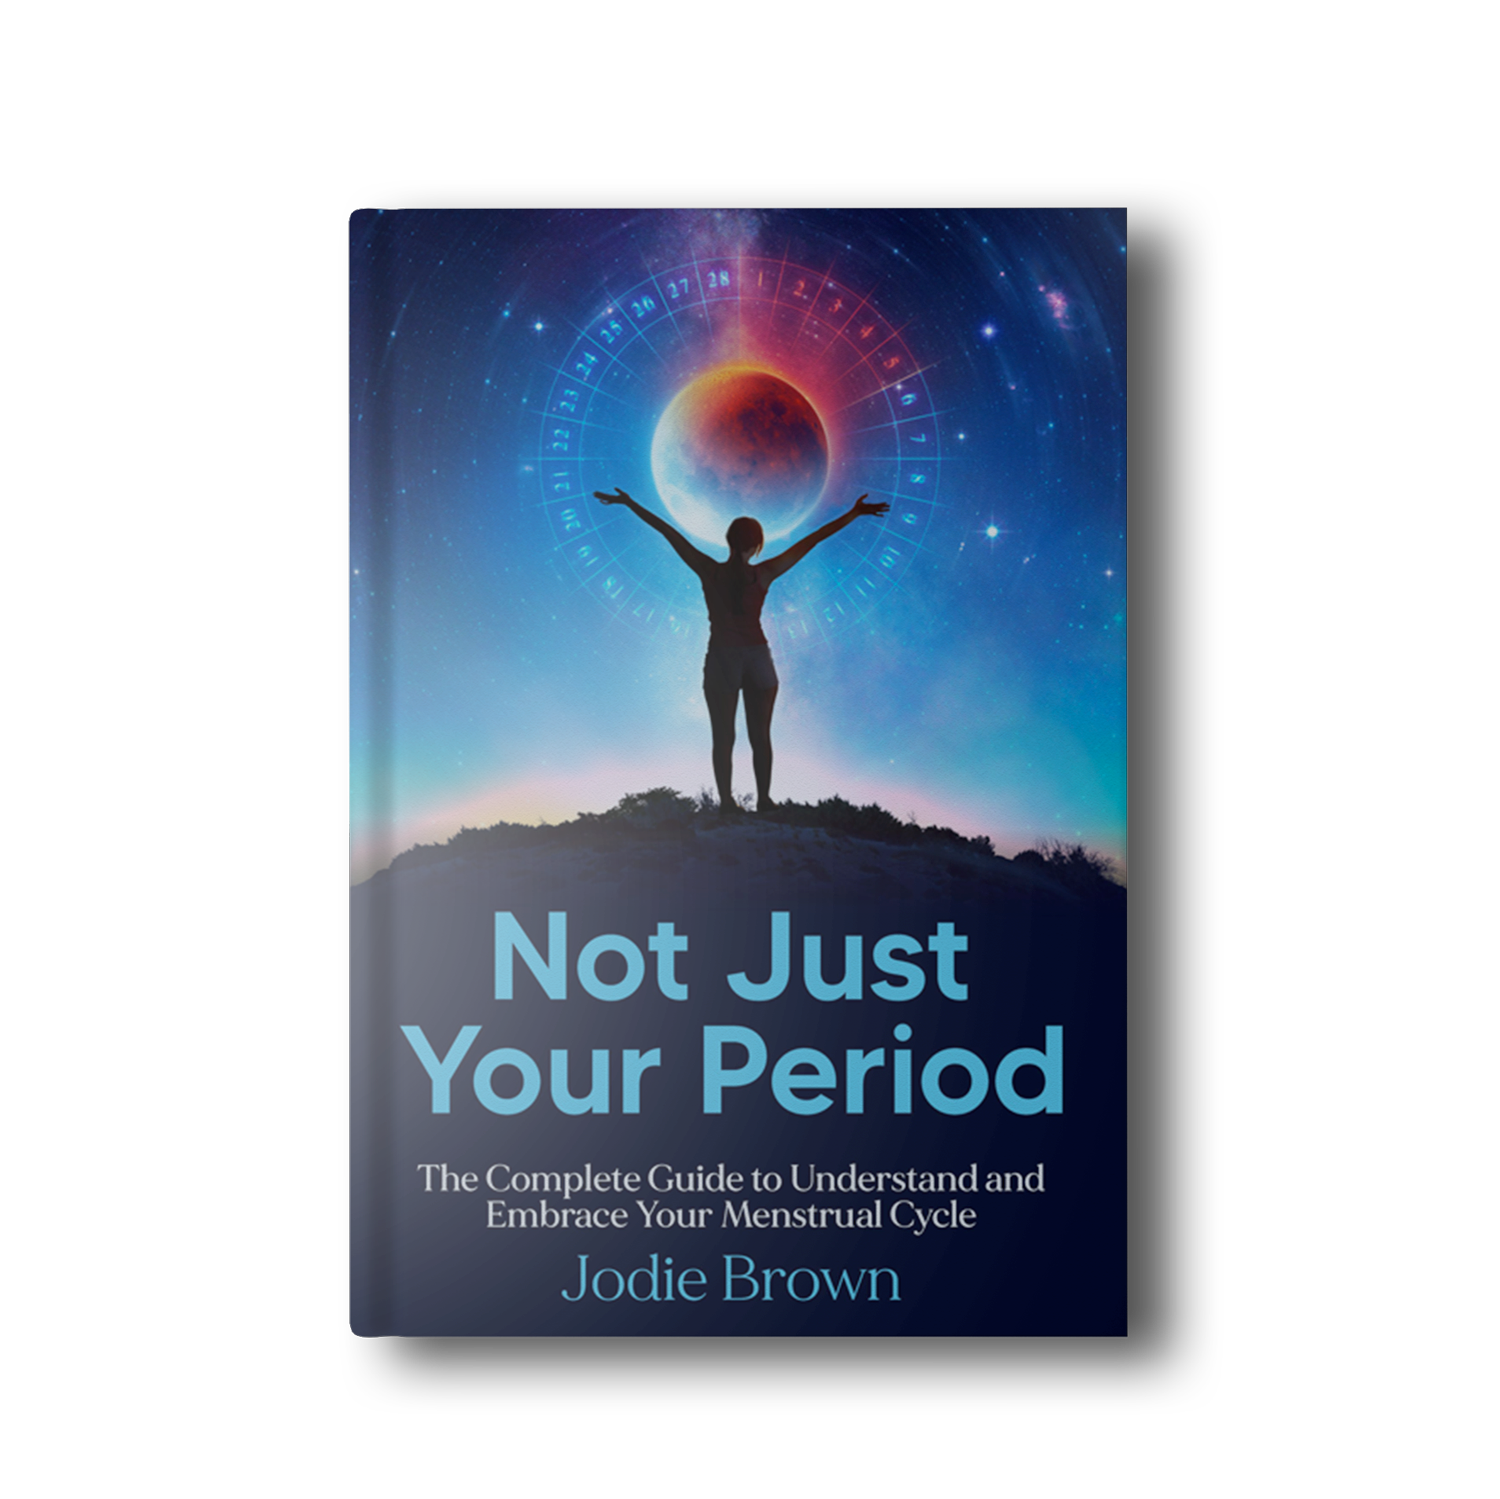 Not Just Your Period by Jodie Brown